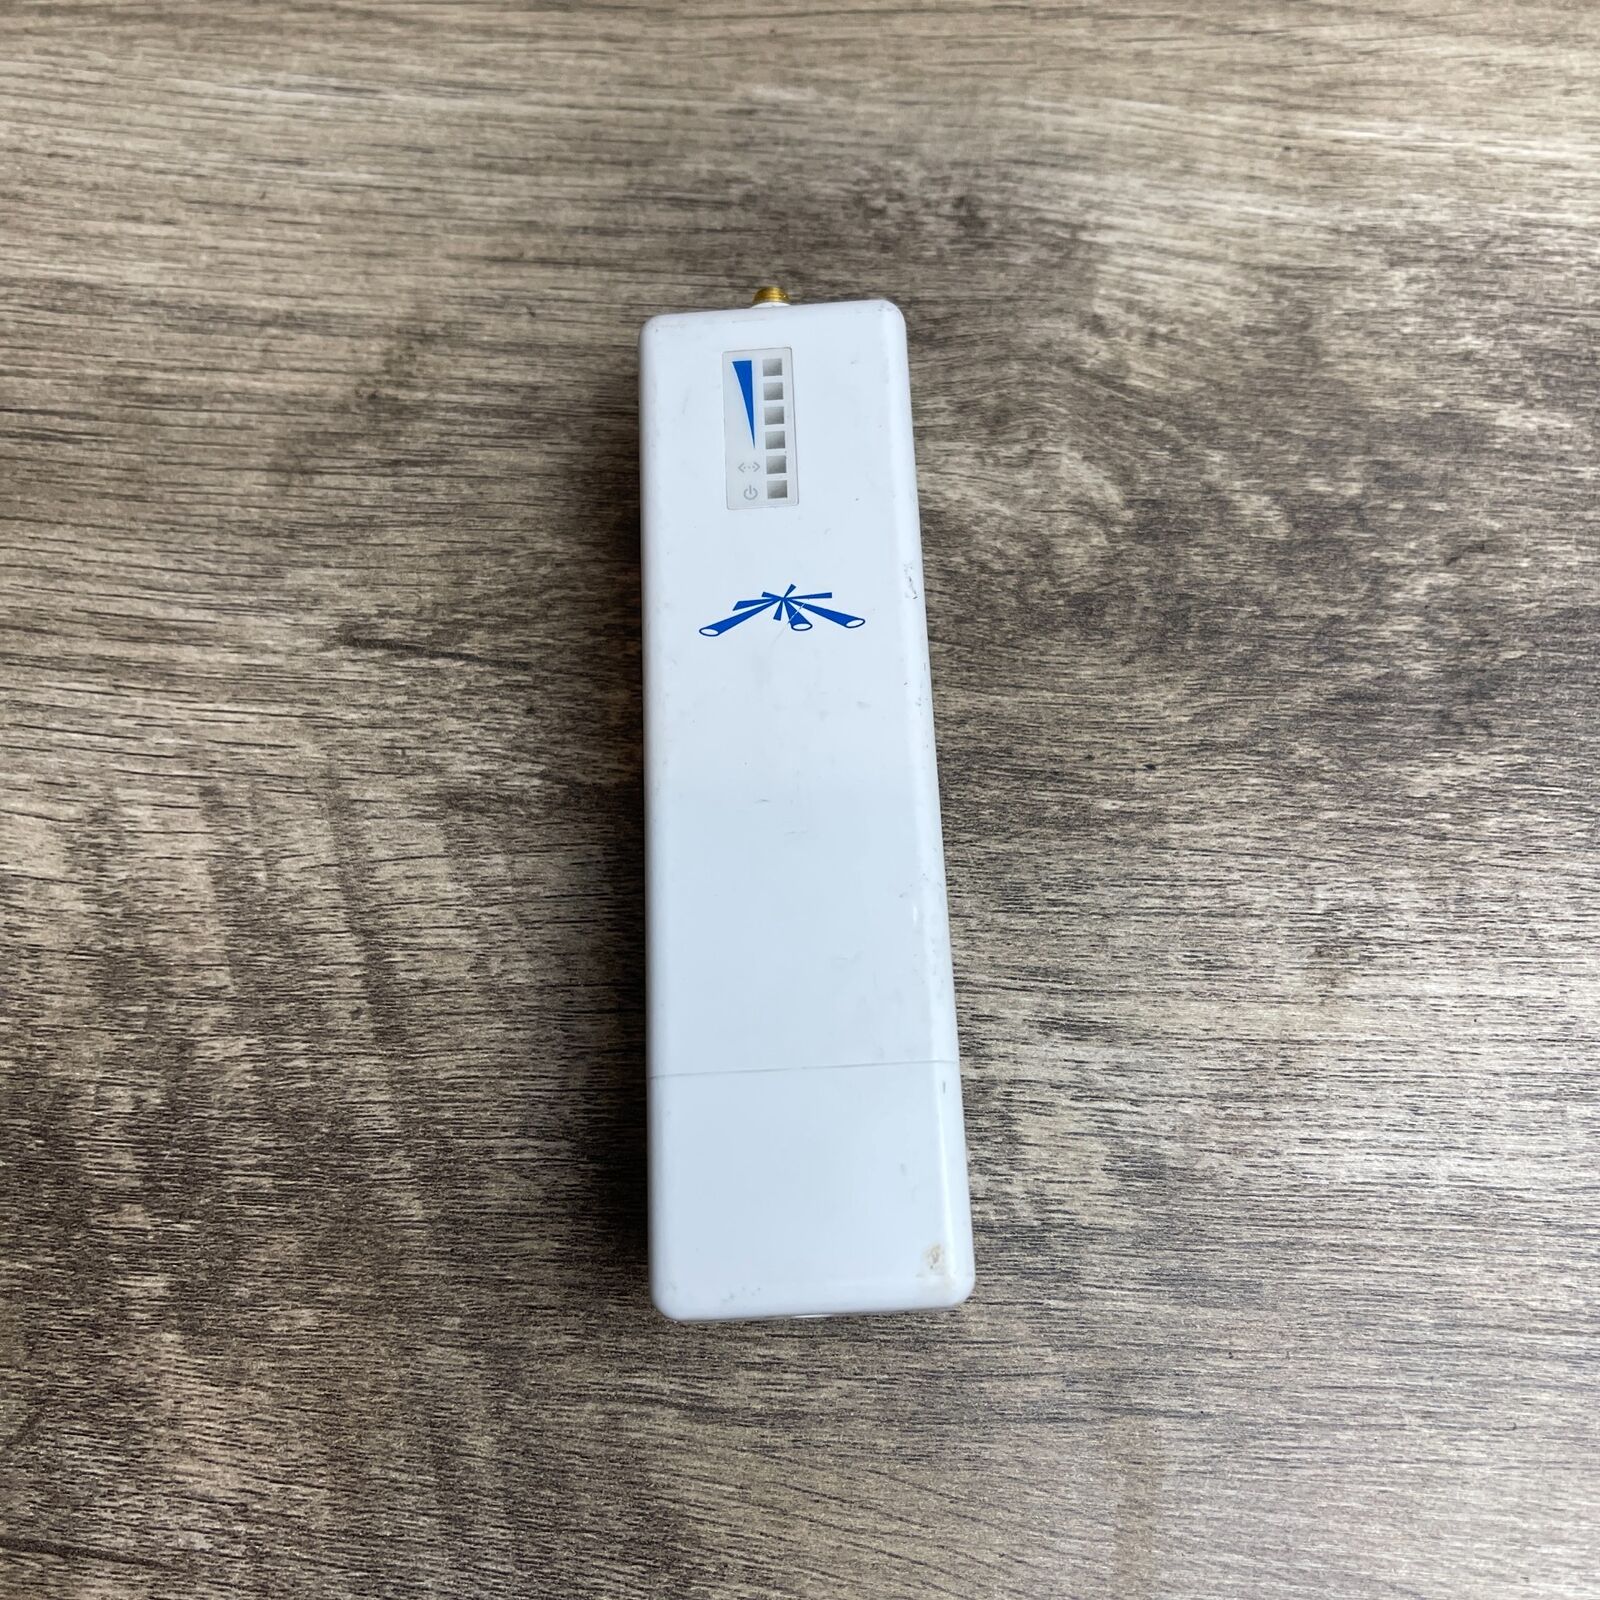 Ubiquiti Networks PicoStation2 Wi-Fi Access Point Unit Indoor/Outdoor Compact